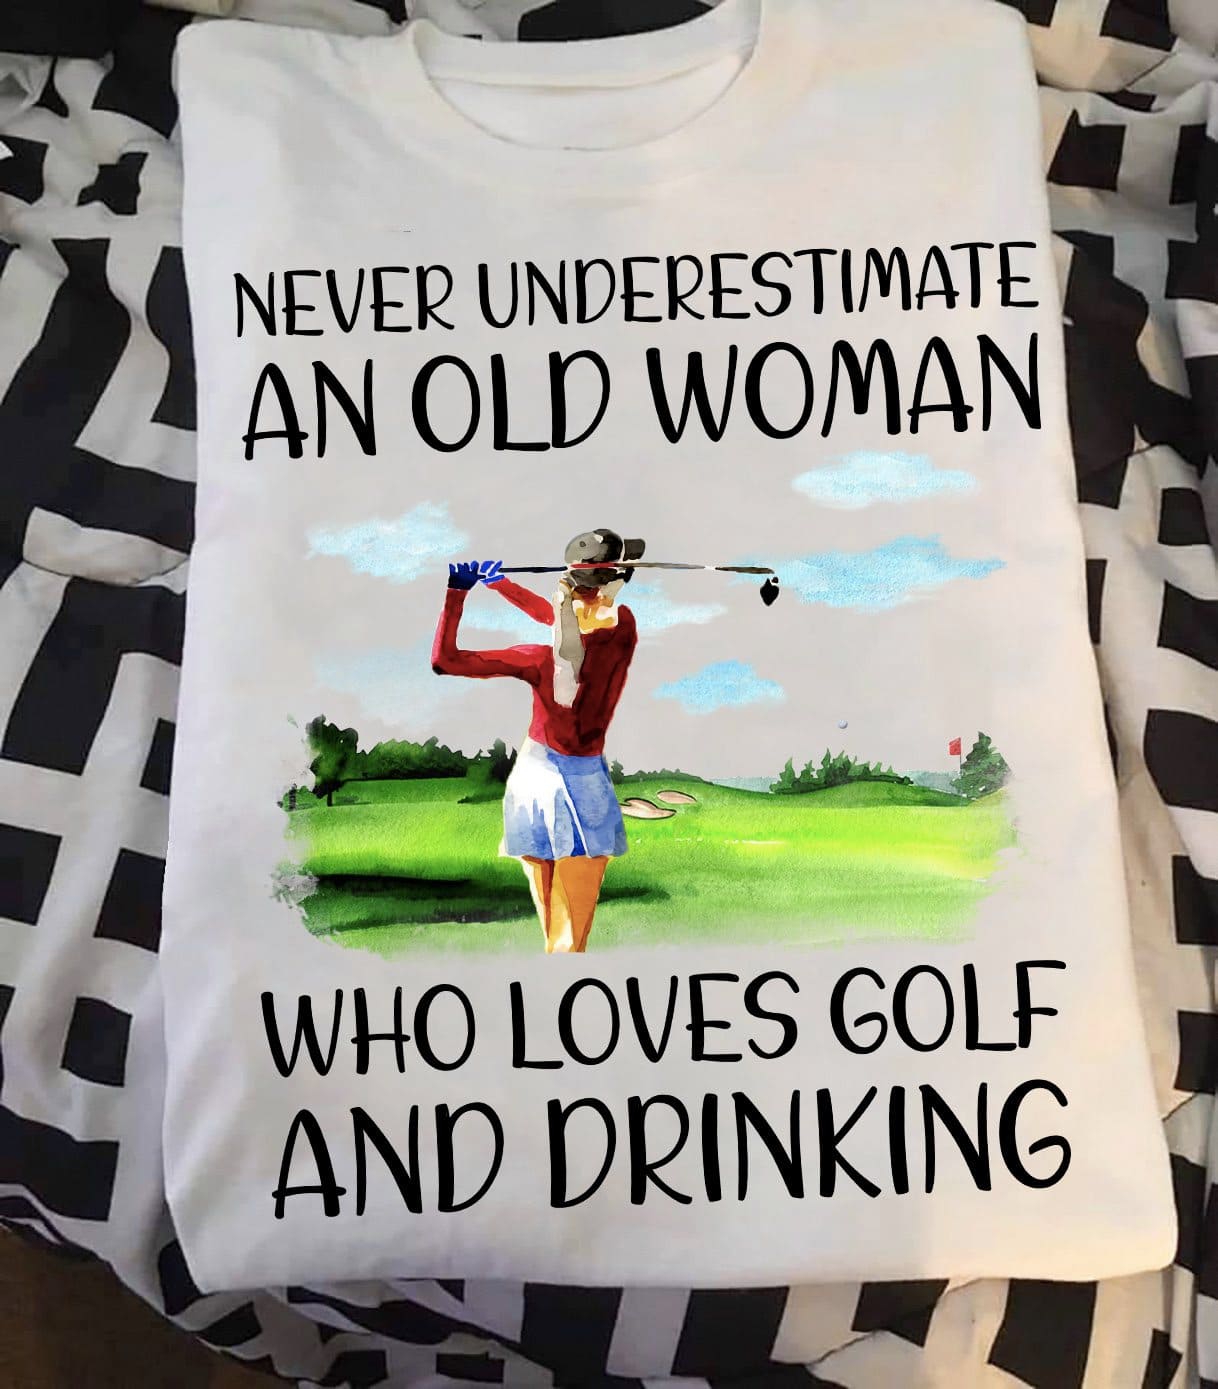 Never underestimate an old woman who loves golf and drinking - Woman the golfer, playing golf and drinking